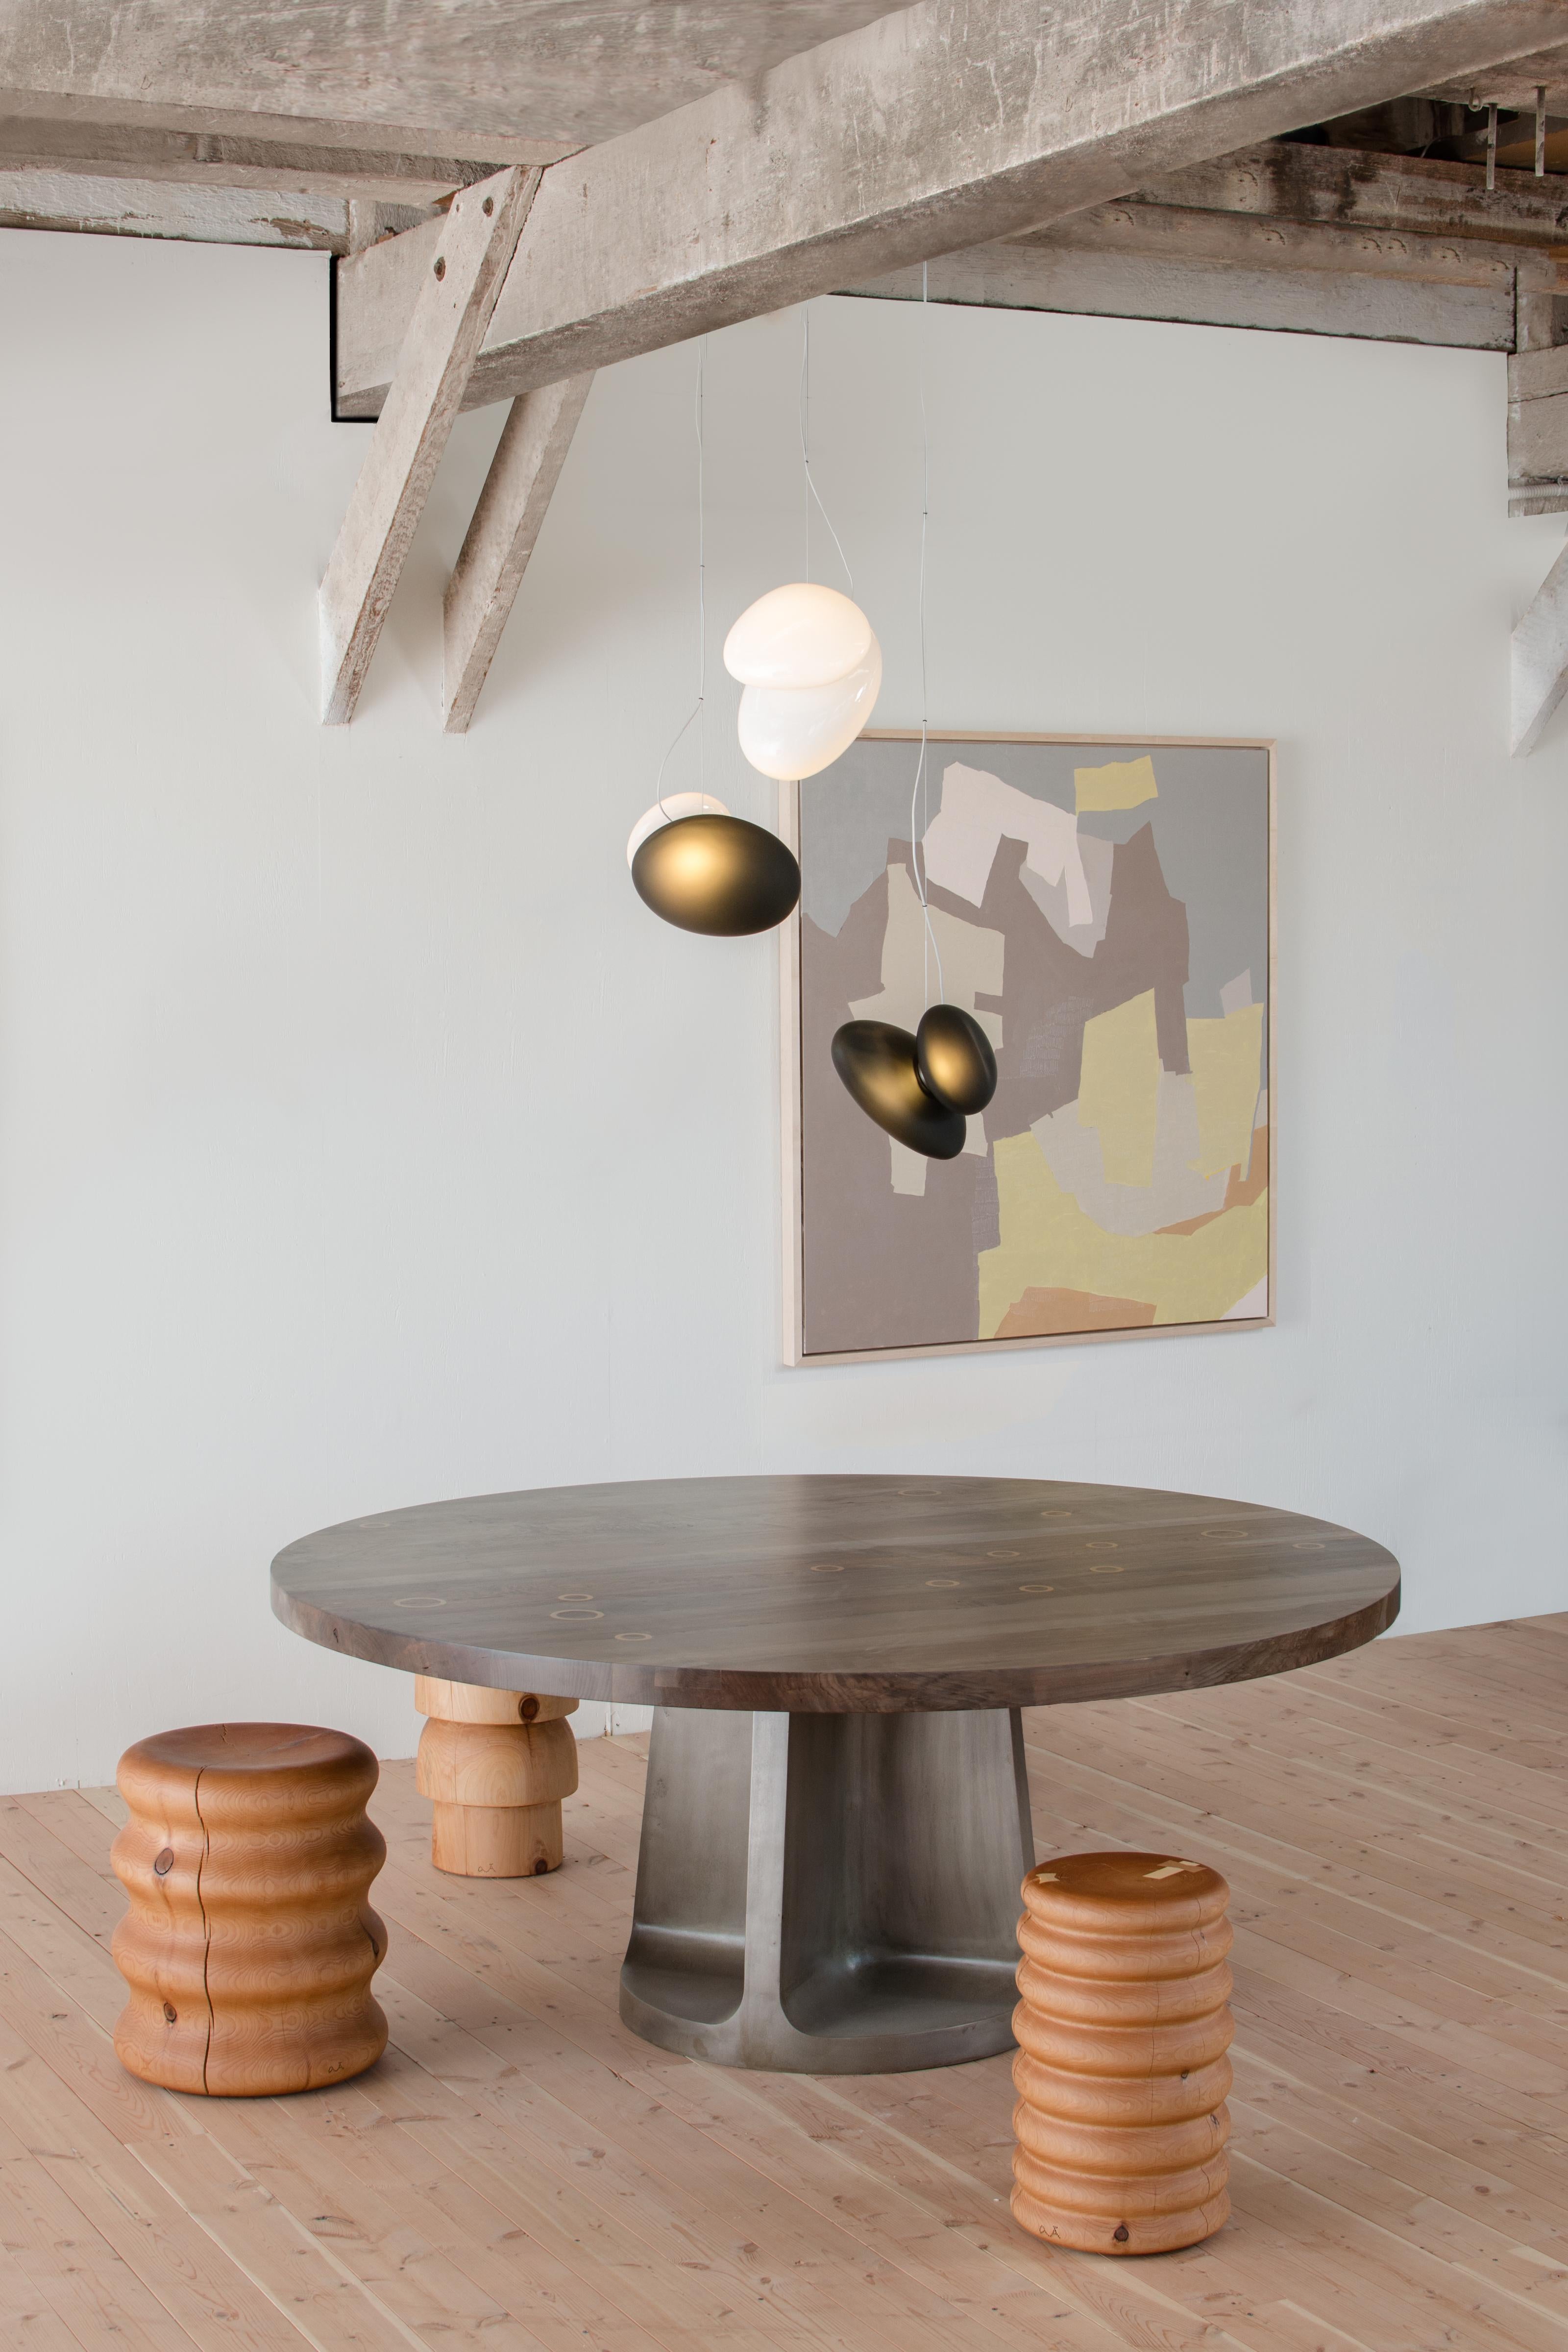 Contemporary chandelier Pebble 

Electrical : 
Voltage: 110 – 277V / 220 – 240V
Integral LED source : 3 x 14W LED 39V

The model shown in picture:
Each pendant: Ø 35cm, 5kg
Canopy: Ø 69cm, 11kg
Color: Yellow
______
Pebble
The Pebble